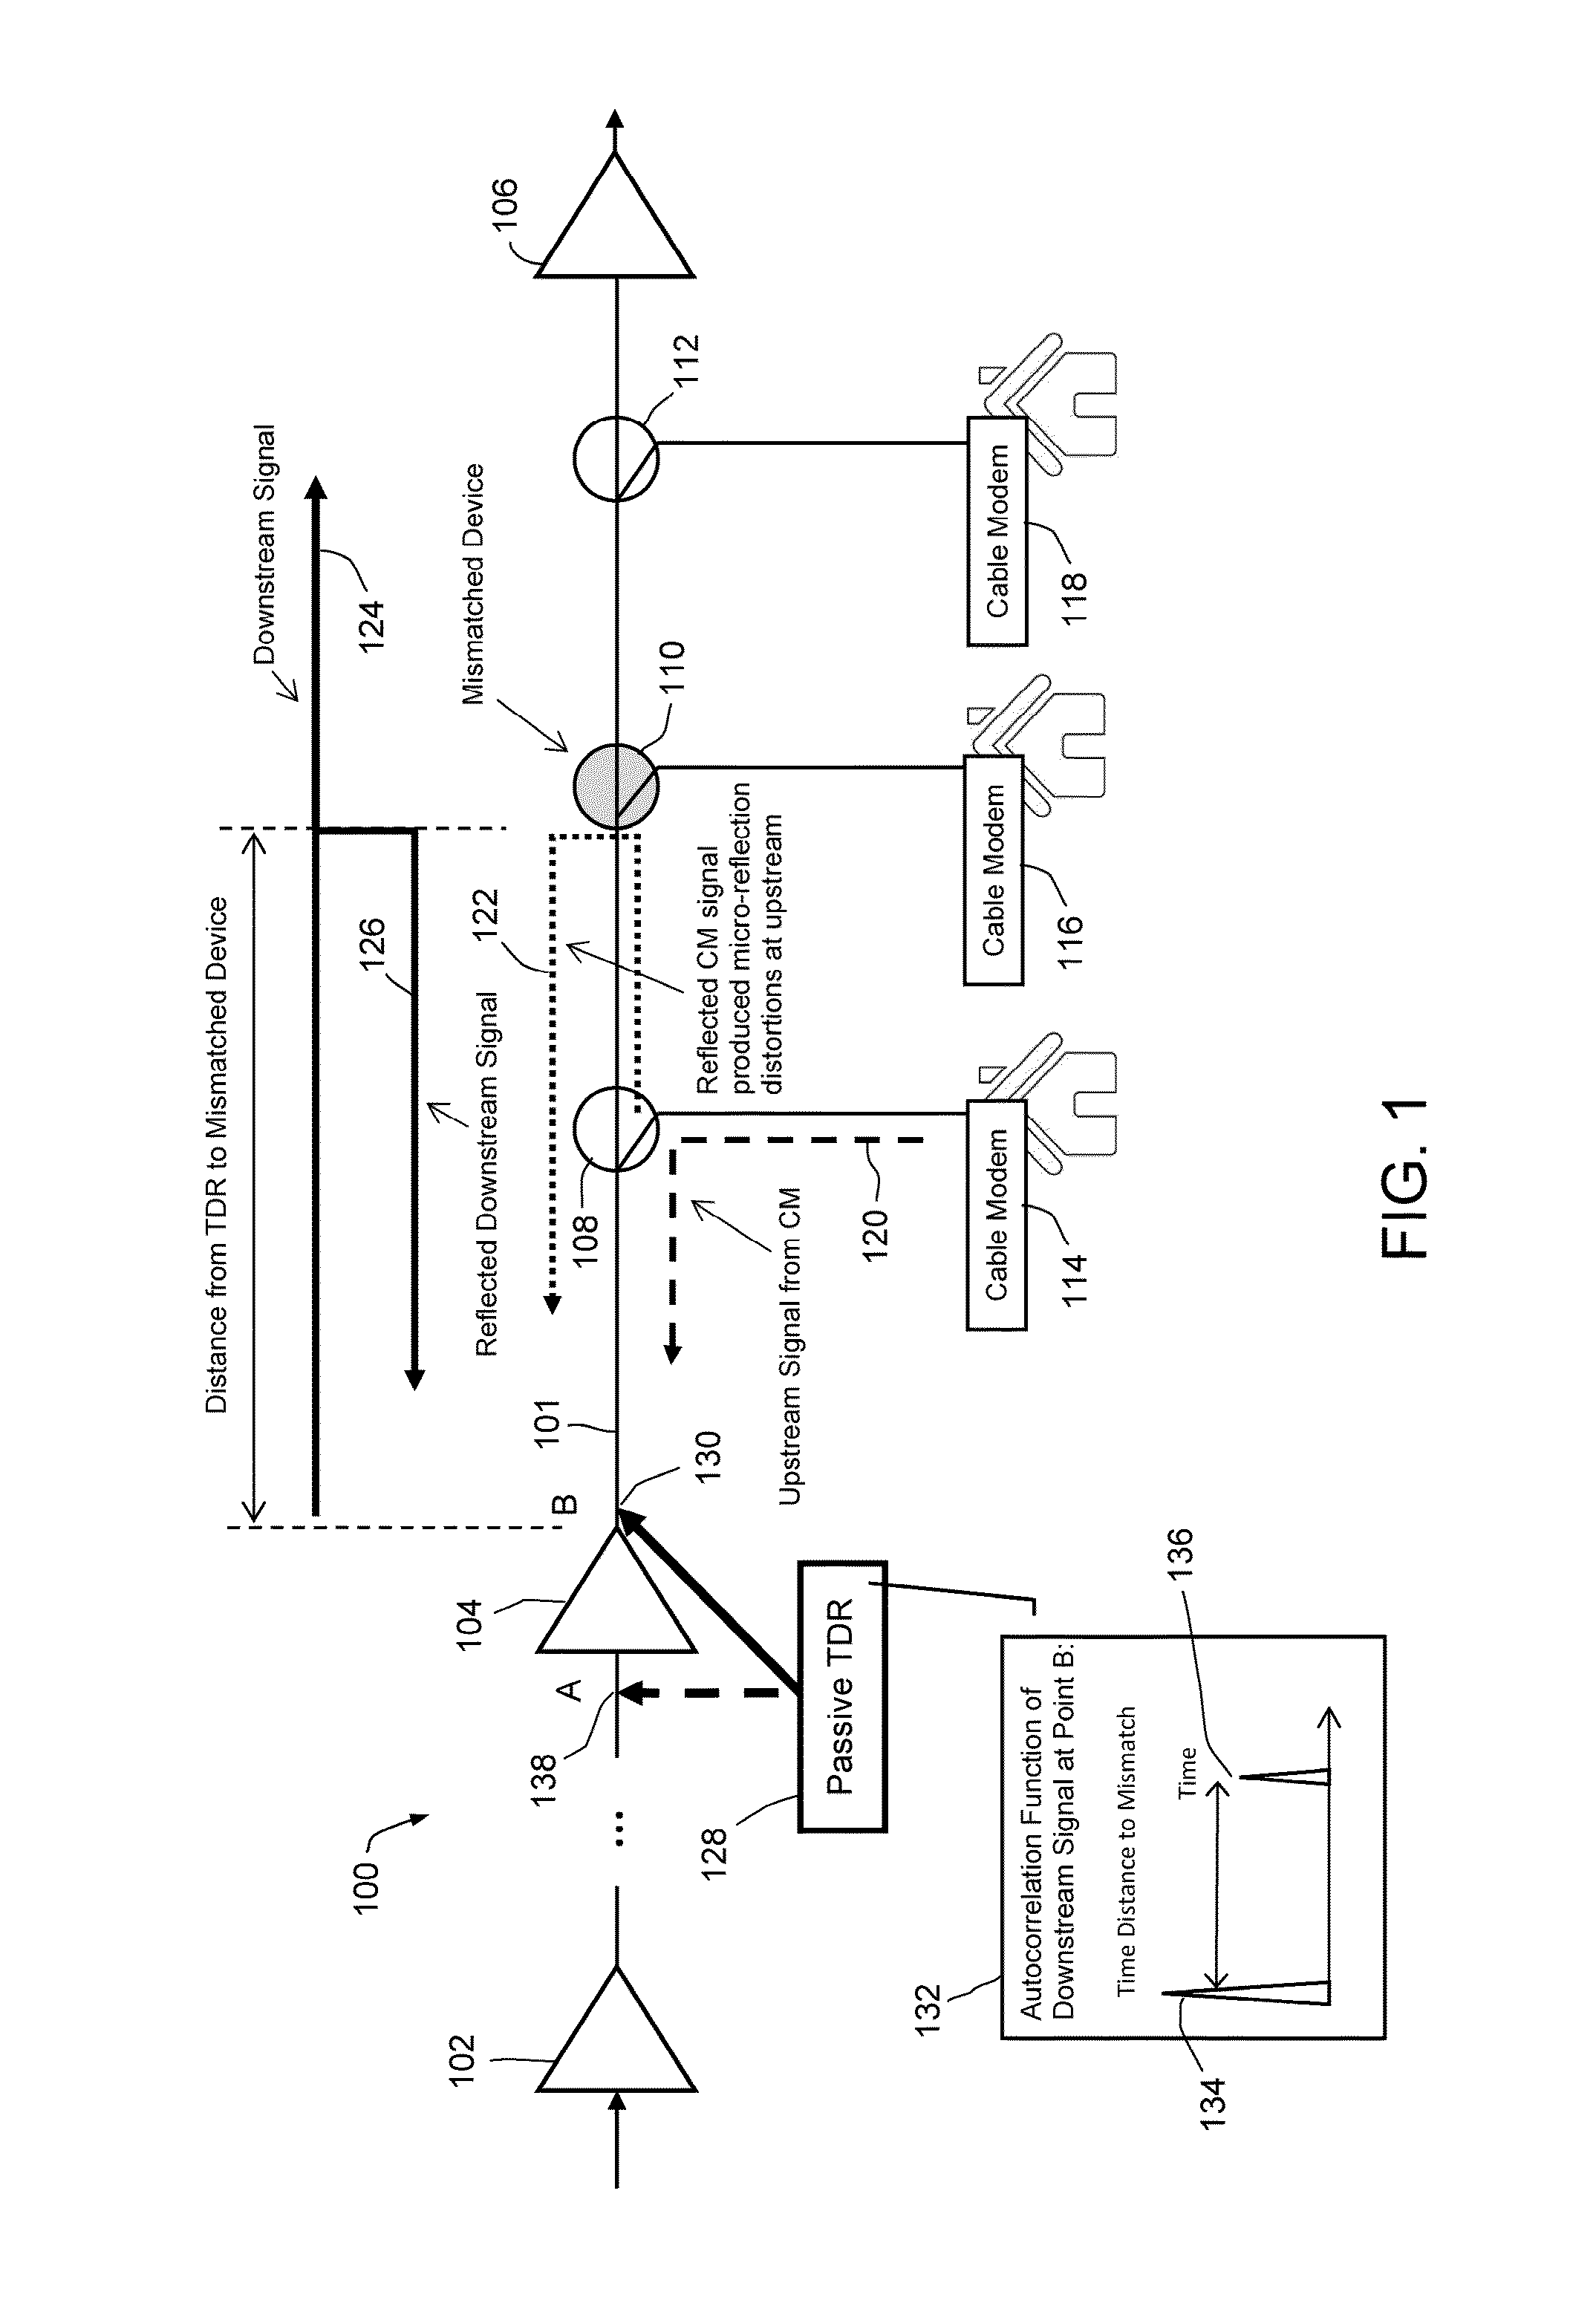 Passive time domain reflectometer for HFC network